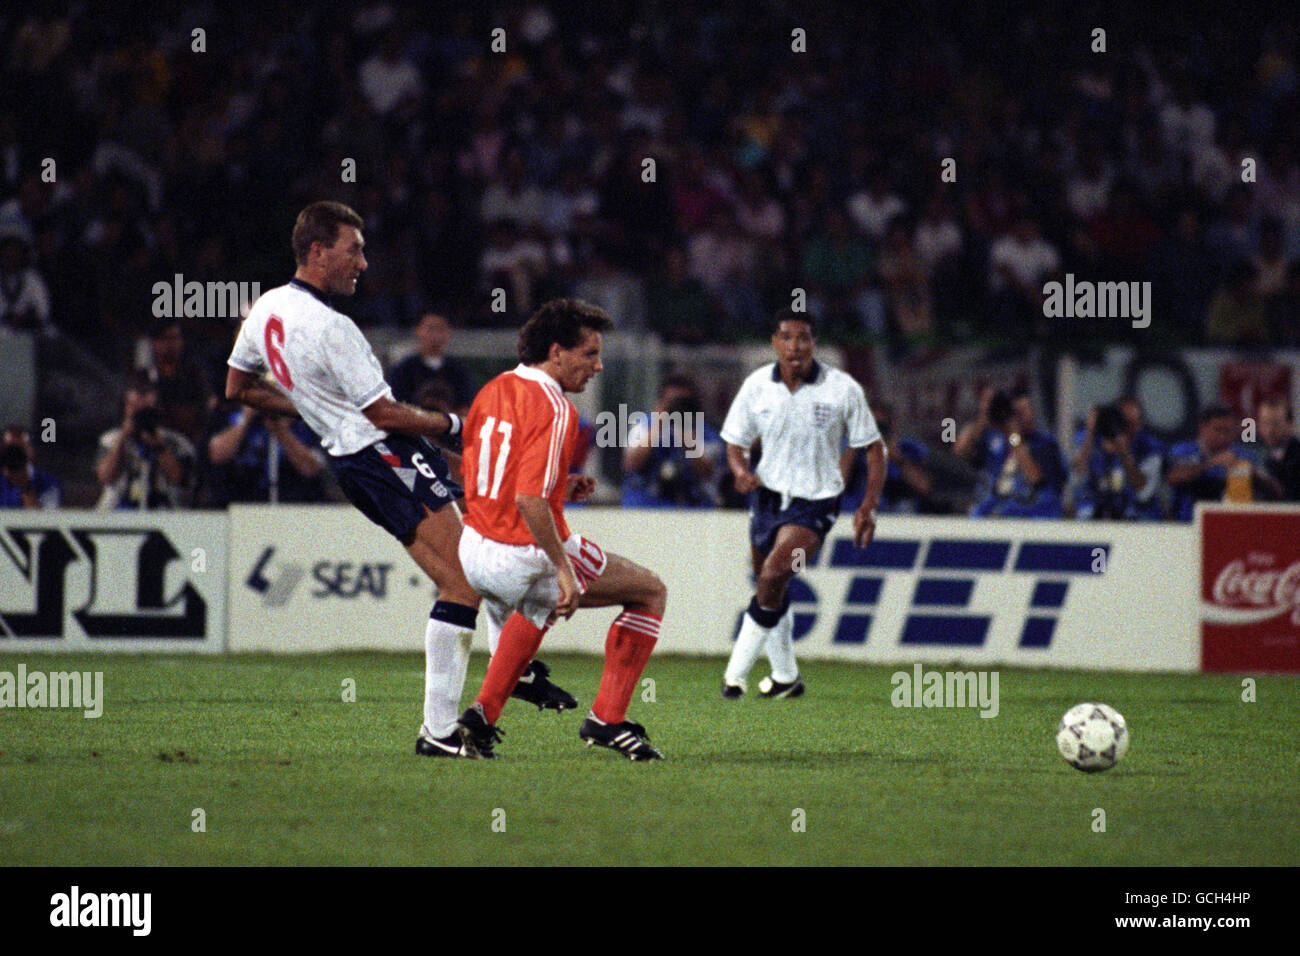 Soccer - FIFA World Cup Italia 90 - Group F - England v Netherlands - Stadio Sant'Elia, Cagliari. England's Terry Butcher plays the ball under pressure from the Netherlands' Hans Gillhaus. England's Des Walker is in the background. Stock Photo